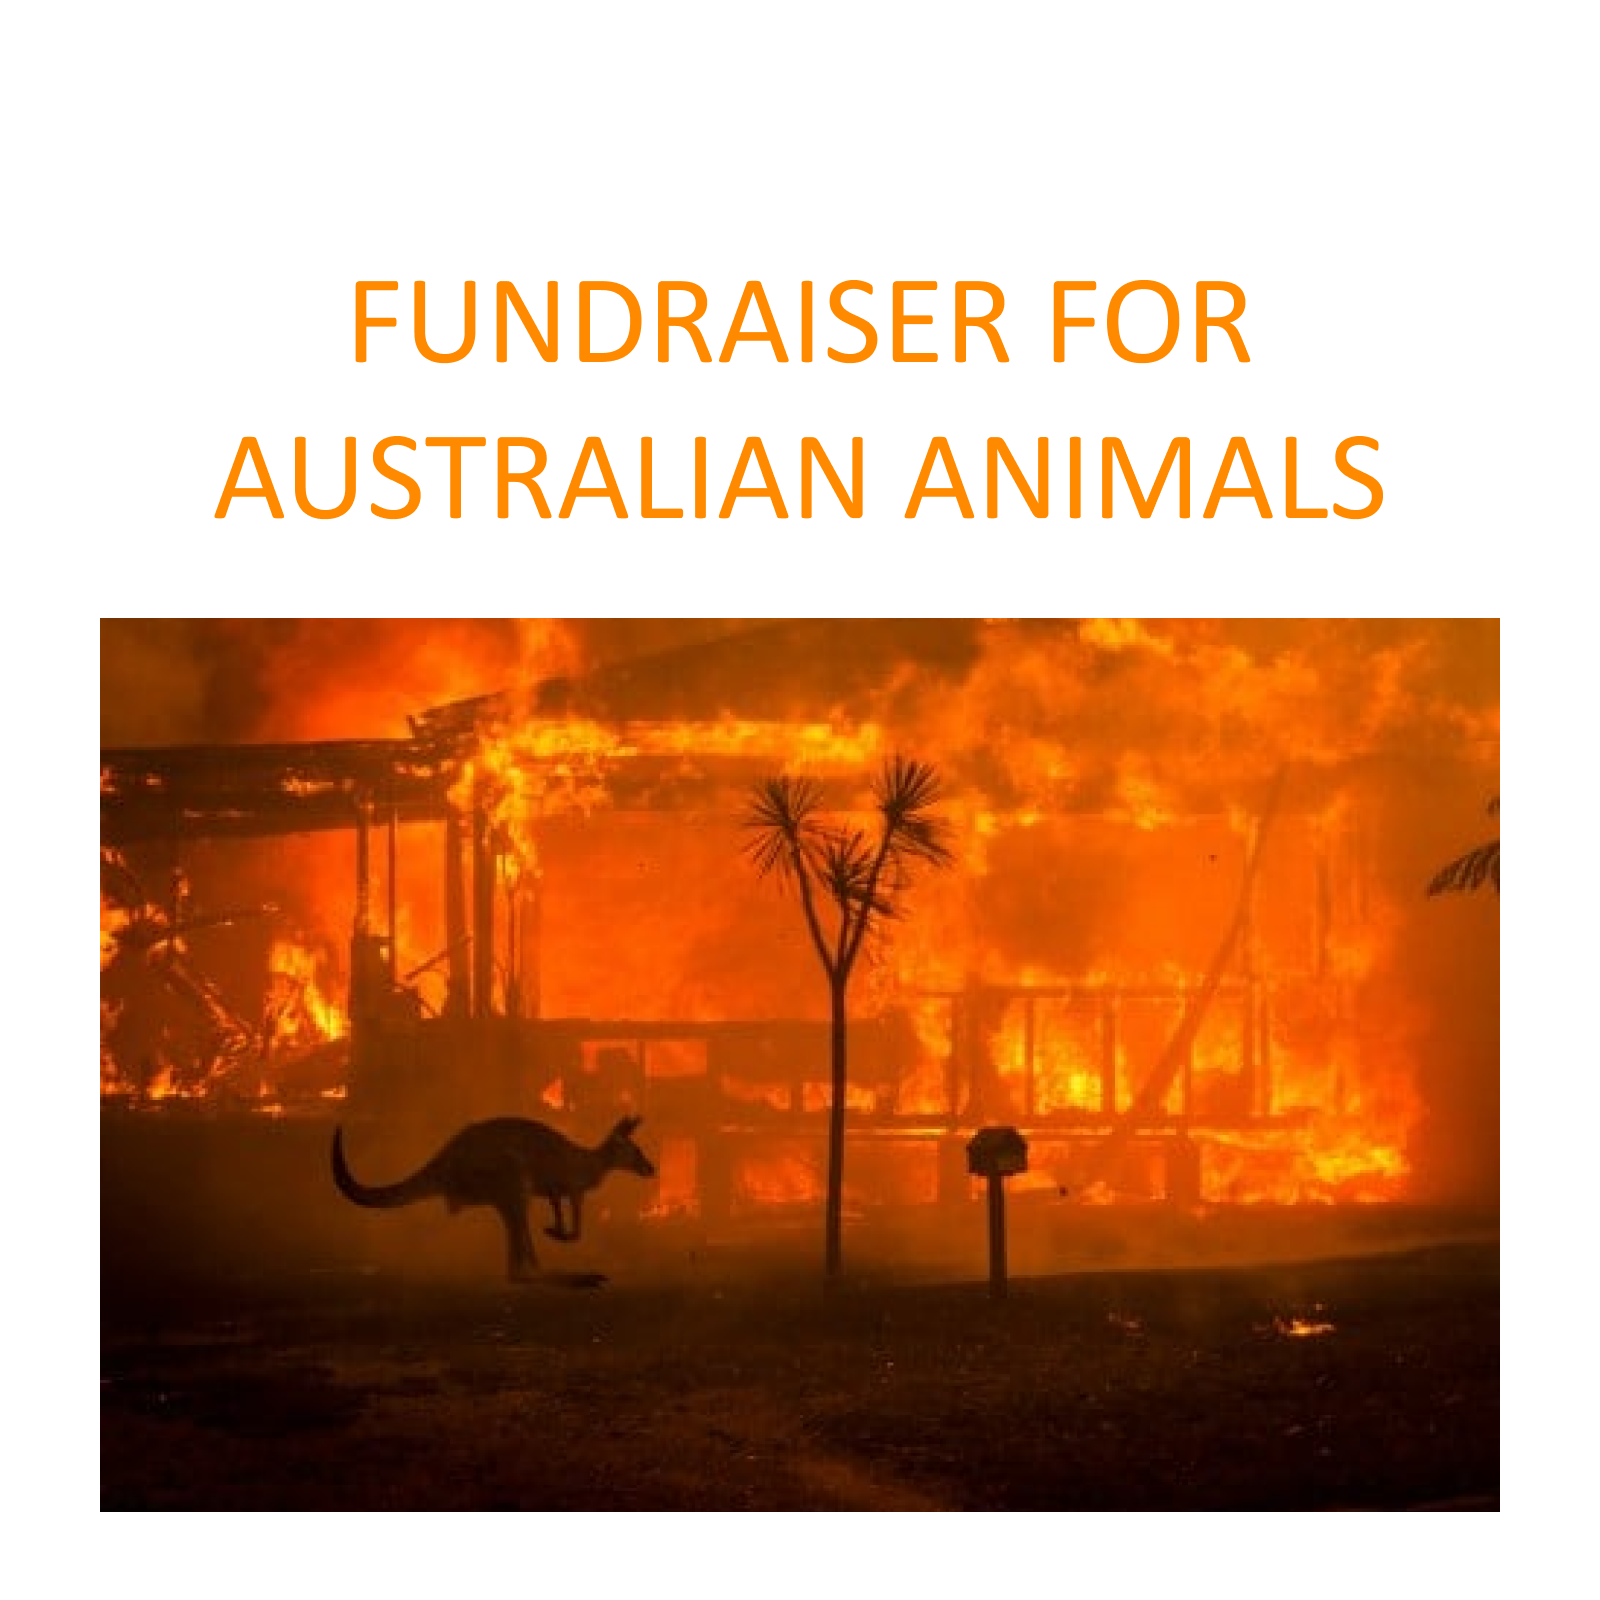 Fundraiser fo Australian animals affected by the bushfires